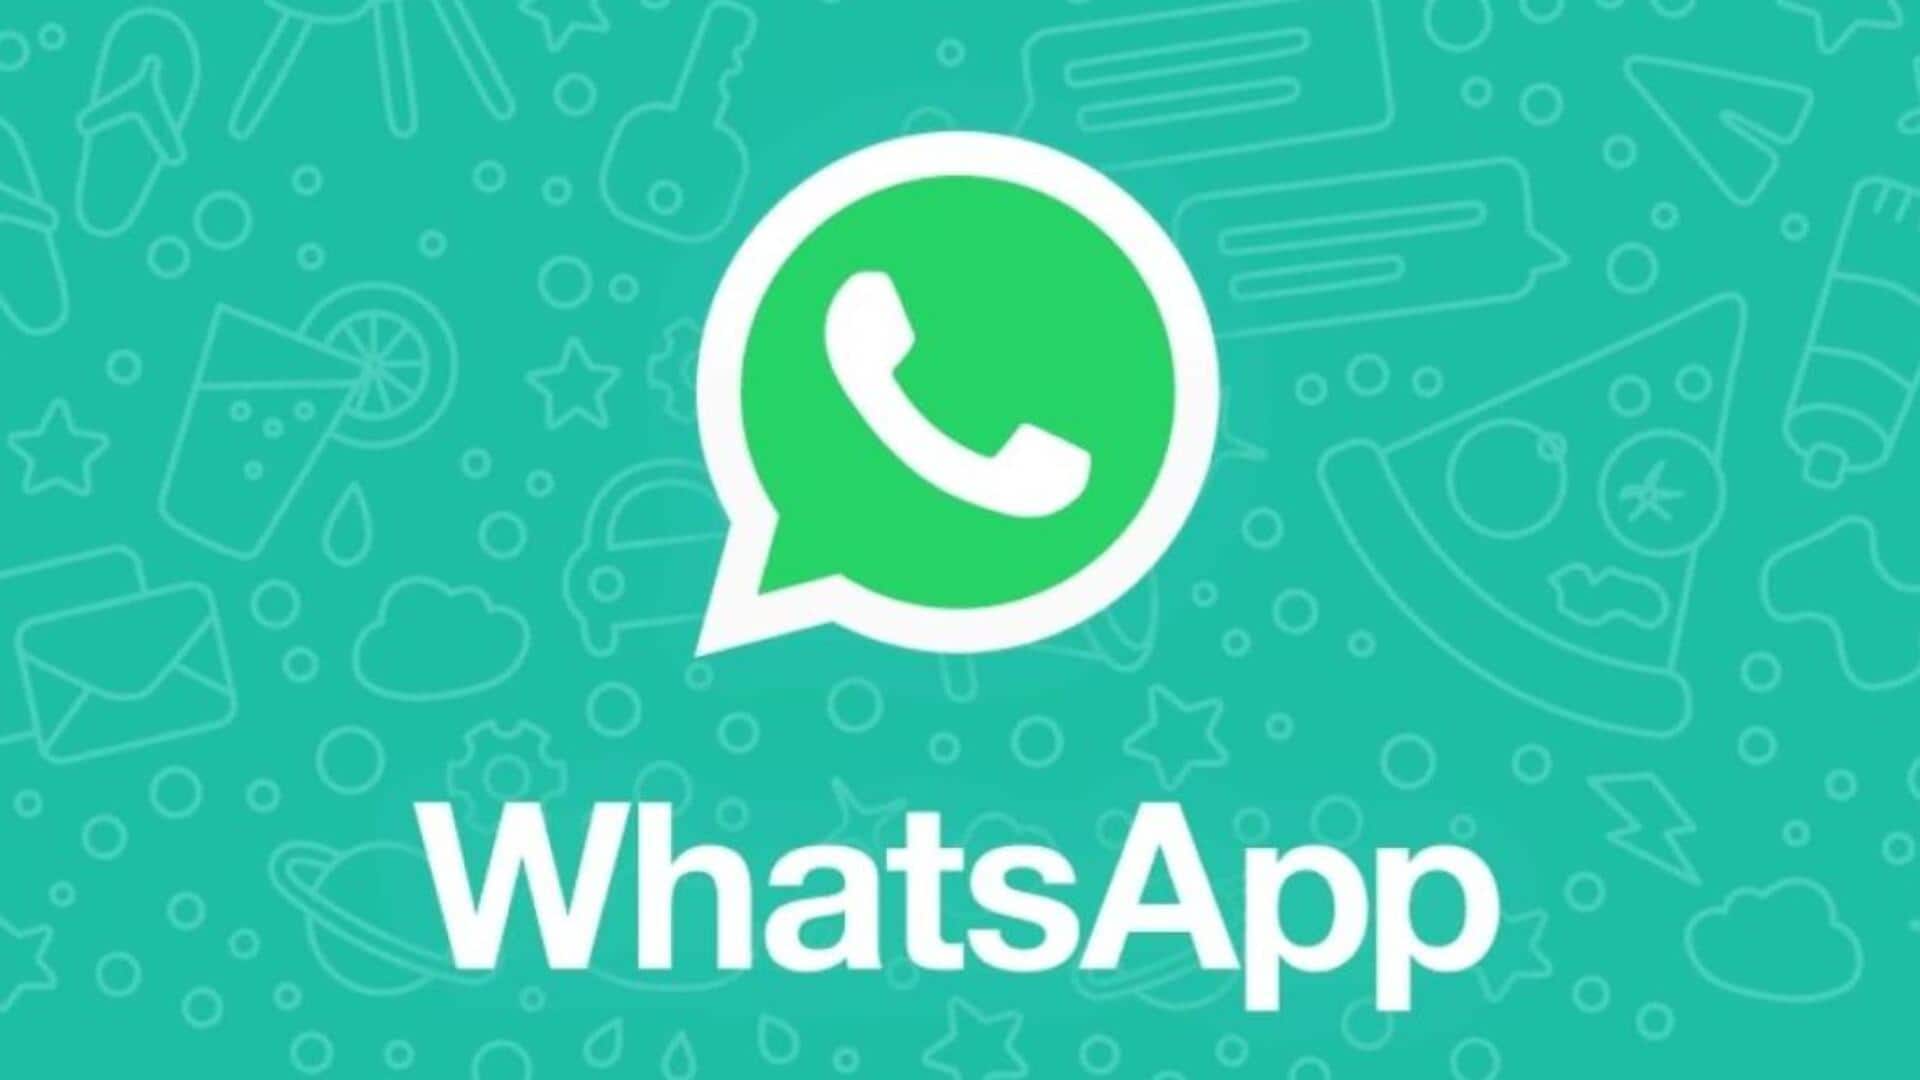 WhatsApp iOS beta update brings message reaction filter for Channels